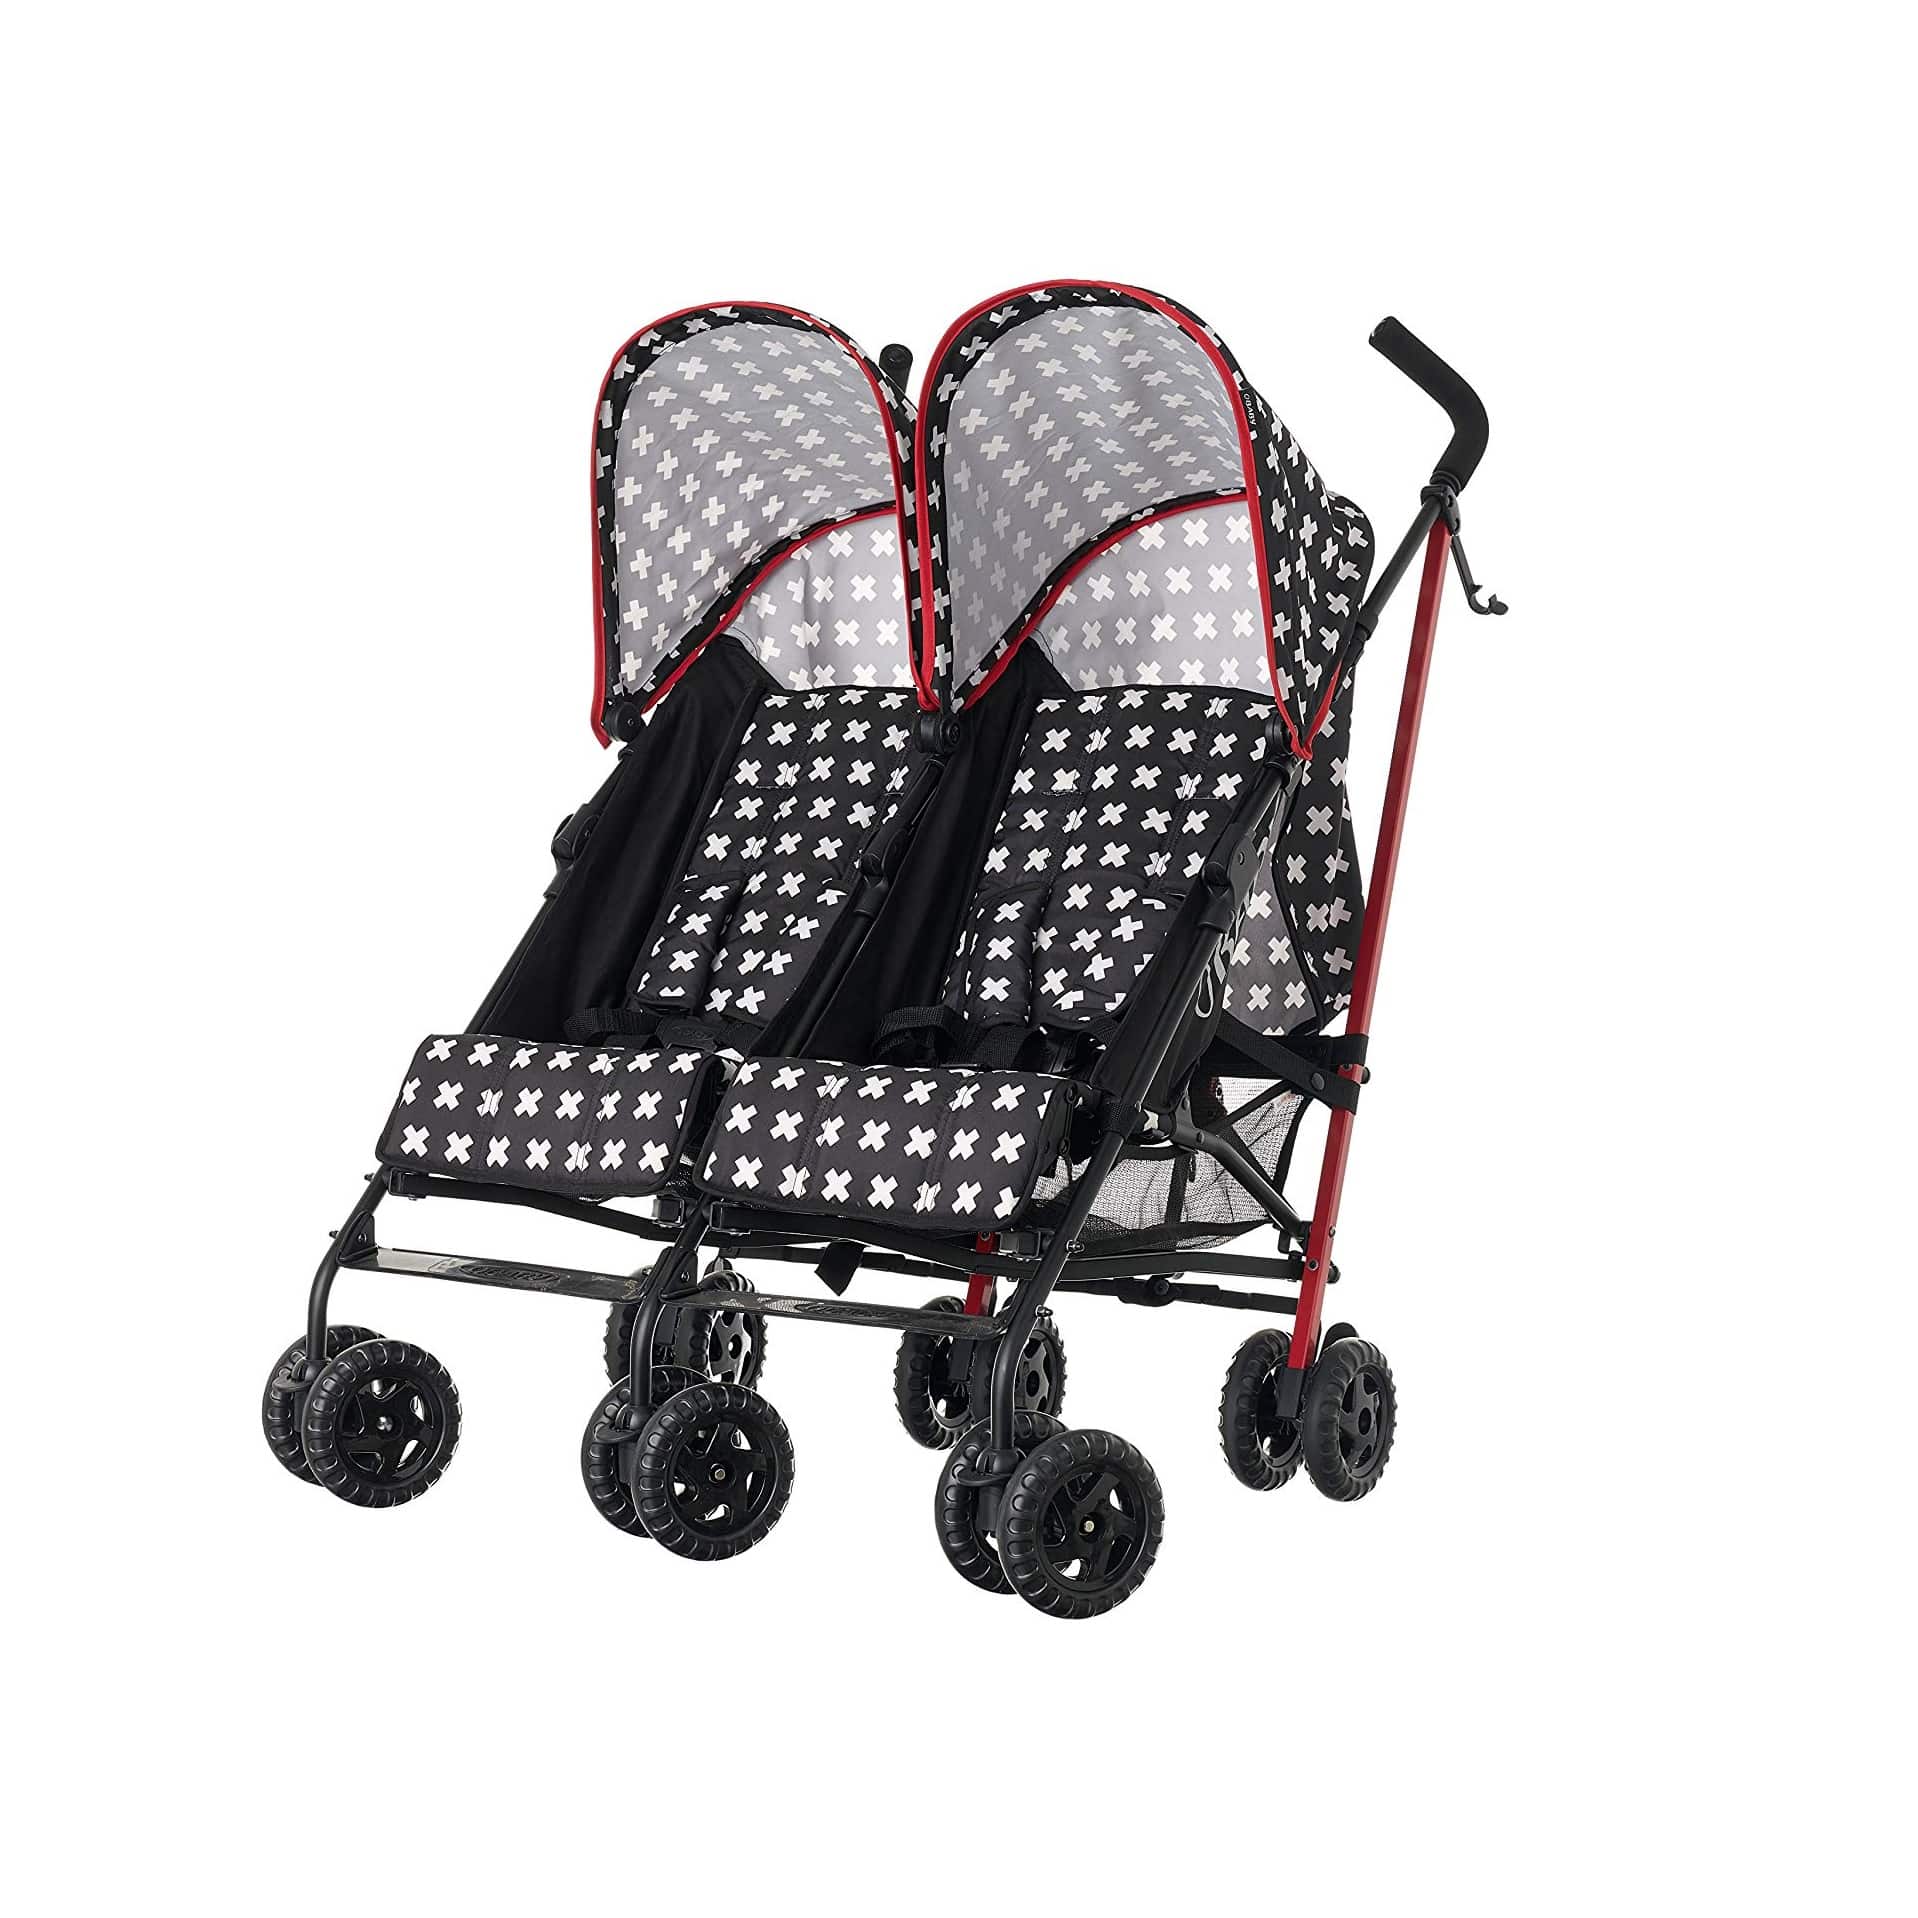 obaby twin buggy